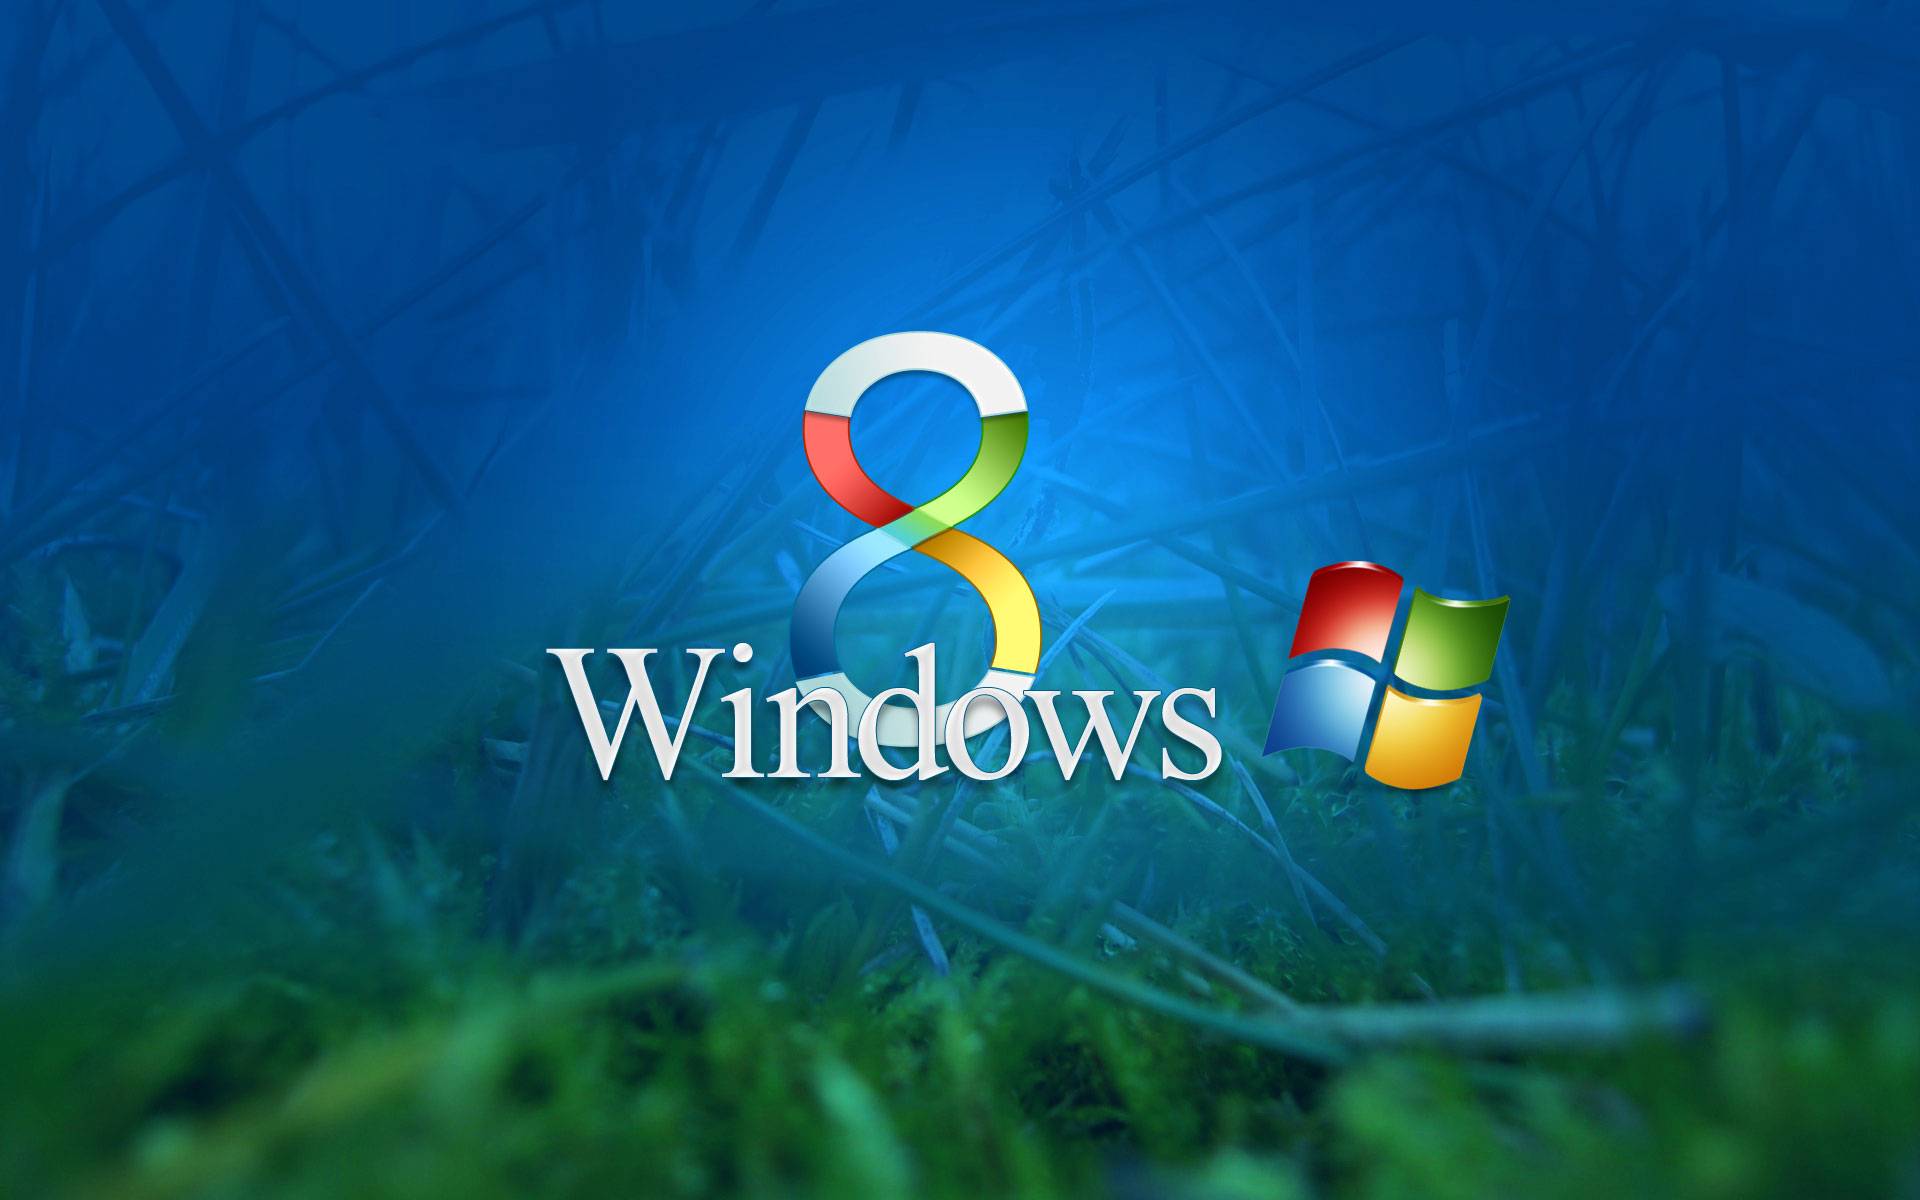 Windows 8 Animated Wallpapers - Wallpaper Zone